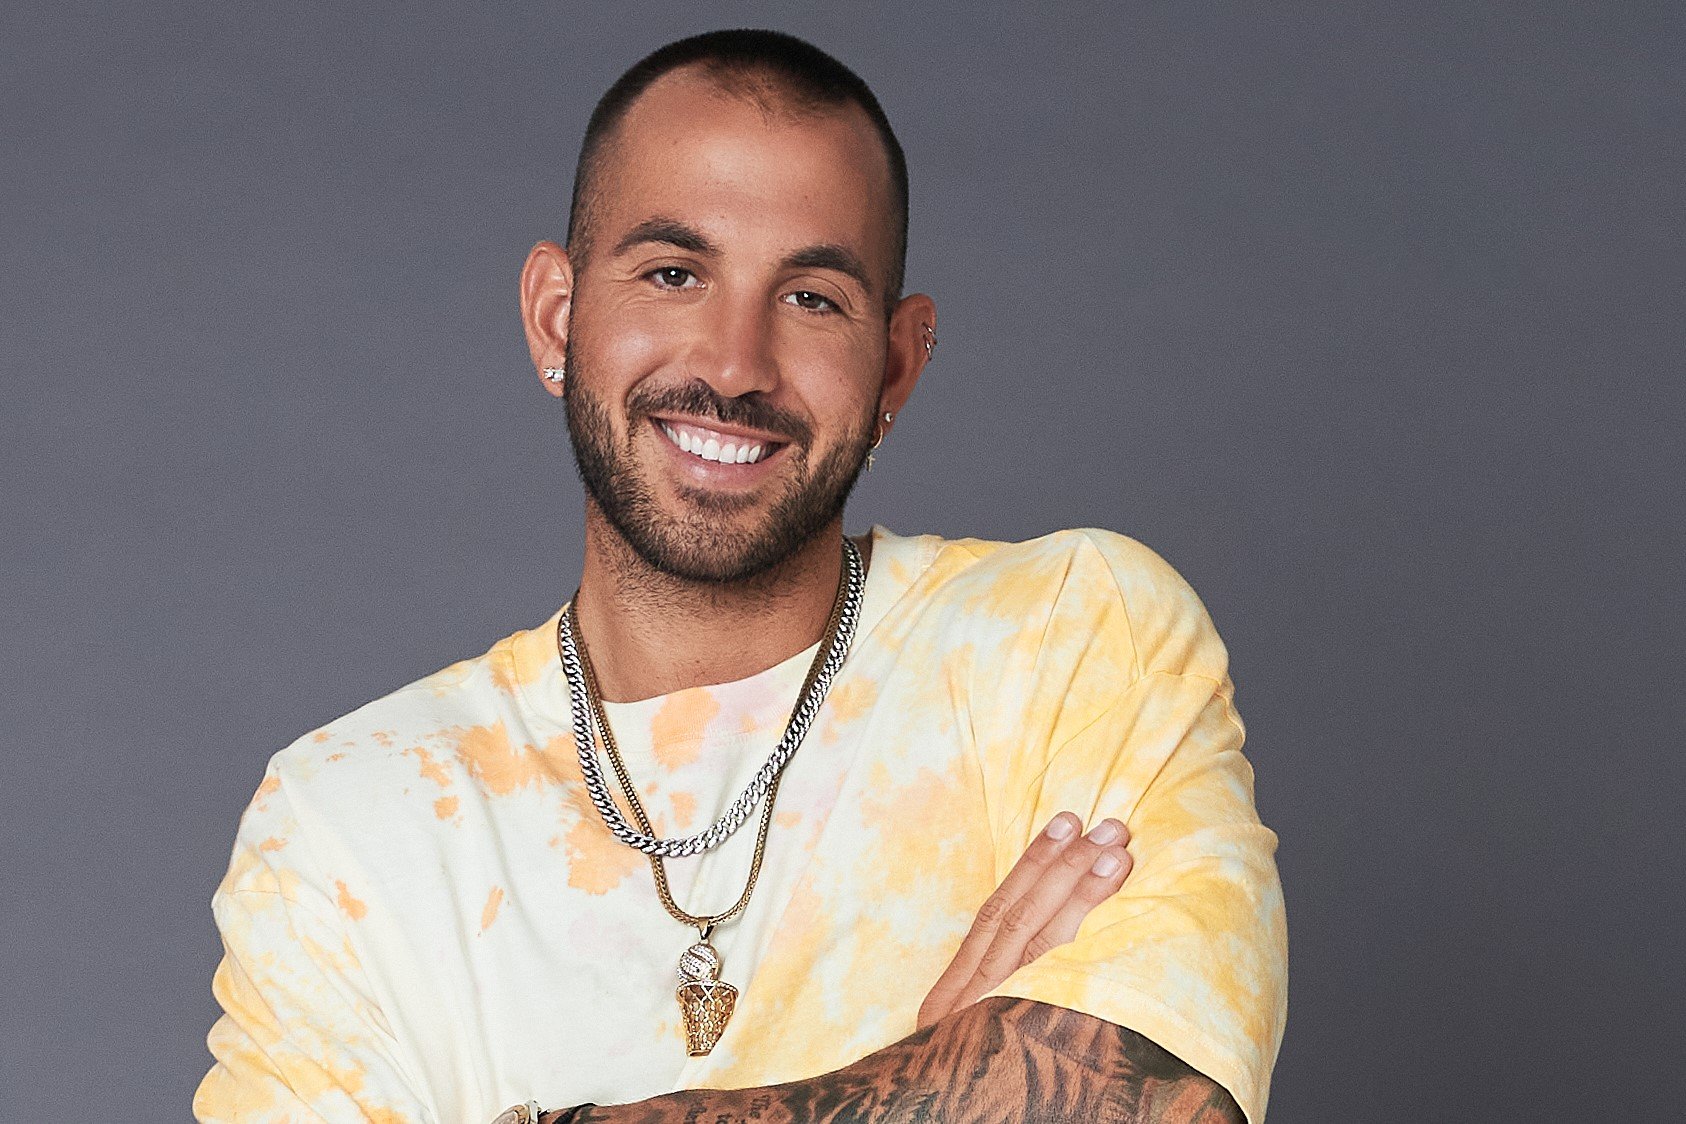 Leo Svete, who, according to 'Are You the One?' Season 9 spoilers, isn't a match with Brooke Rachman, wears an orange and white tie dye shirt.